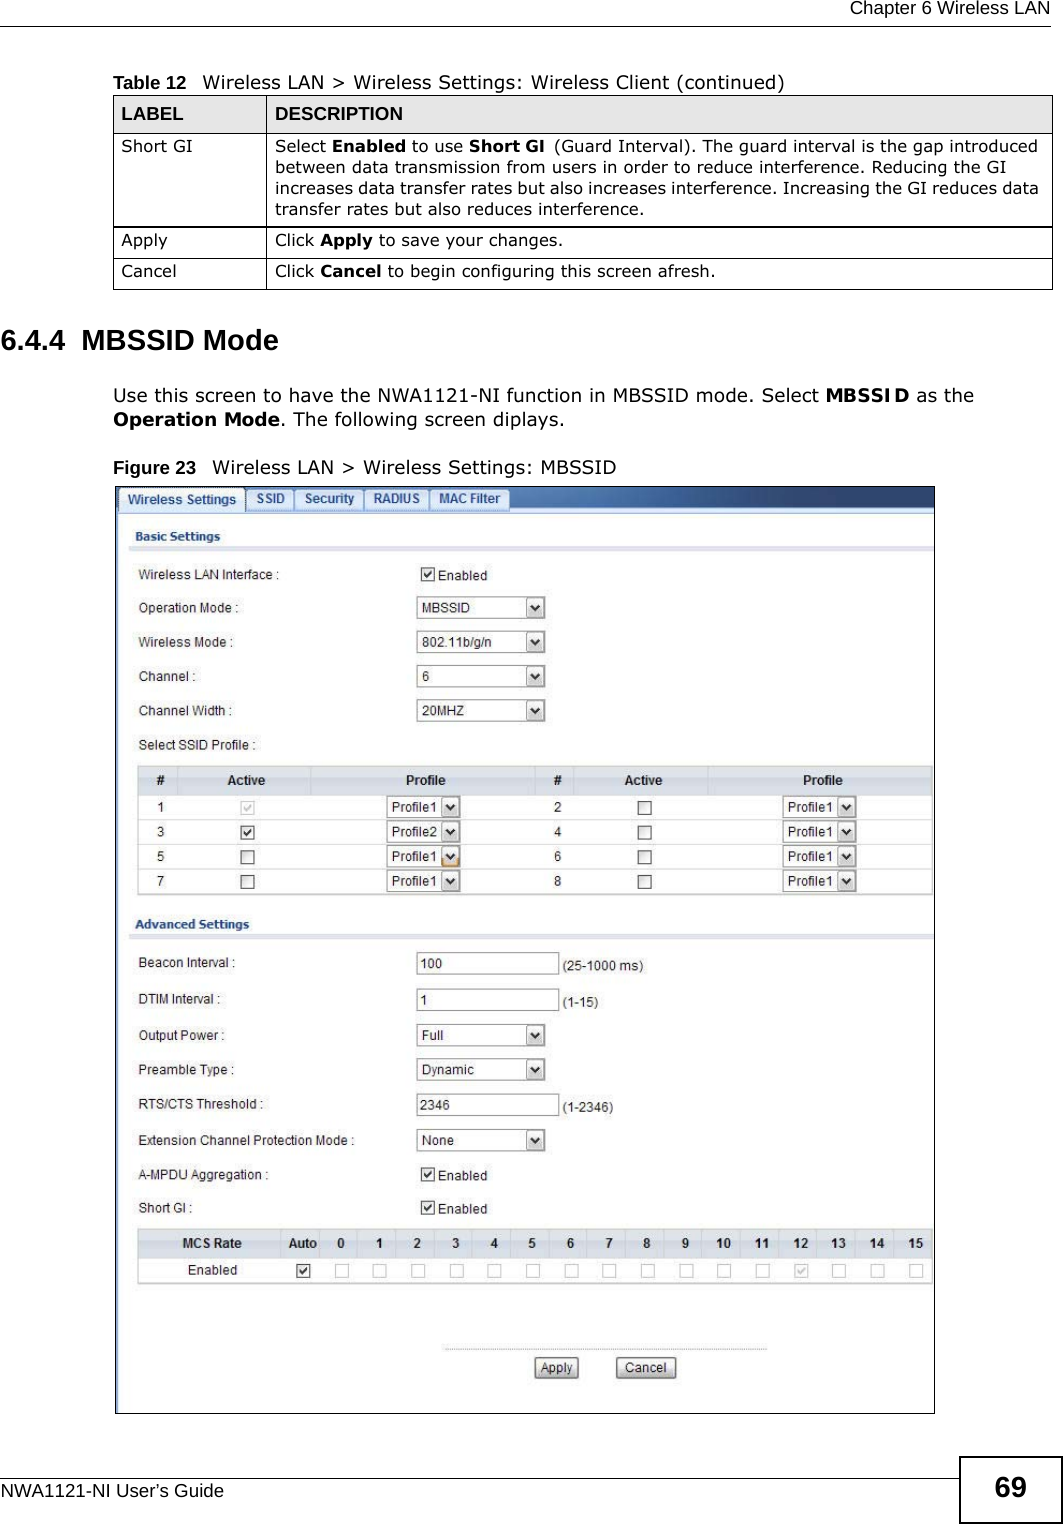  Chapter 6 Wireless LANNWA1121-NI User’s Guide 696.4.4  MBSSID ModeUse this screen to have the NWA1121-NI function in MBSSID mode. Select MBSSID as the Operation Mode. The following screen diplays.Figure 23   Wireless LAN &gt; Wireless Settings: MBSSIDShort GI  Select Enabled to use Short GI (Guard Interval). The guard interval is the gap introduced between data transmission from users in order to reduce interference. Reducing the GI increases data transfer rates but also increases interference. Increasing the GI reduces data transfer rates but also reduces interference.Apply Click Apply to save your changes.Cancel Click Cancel to begin configuring this screen afresh.Table 12   Wireless LAN &gt; Wireless Settings: Wireless Client (continued)LABEL DESCRIPTION